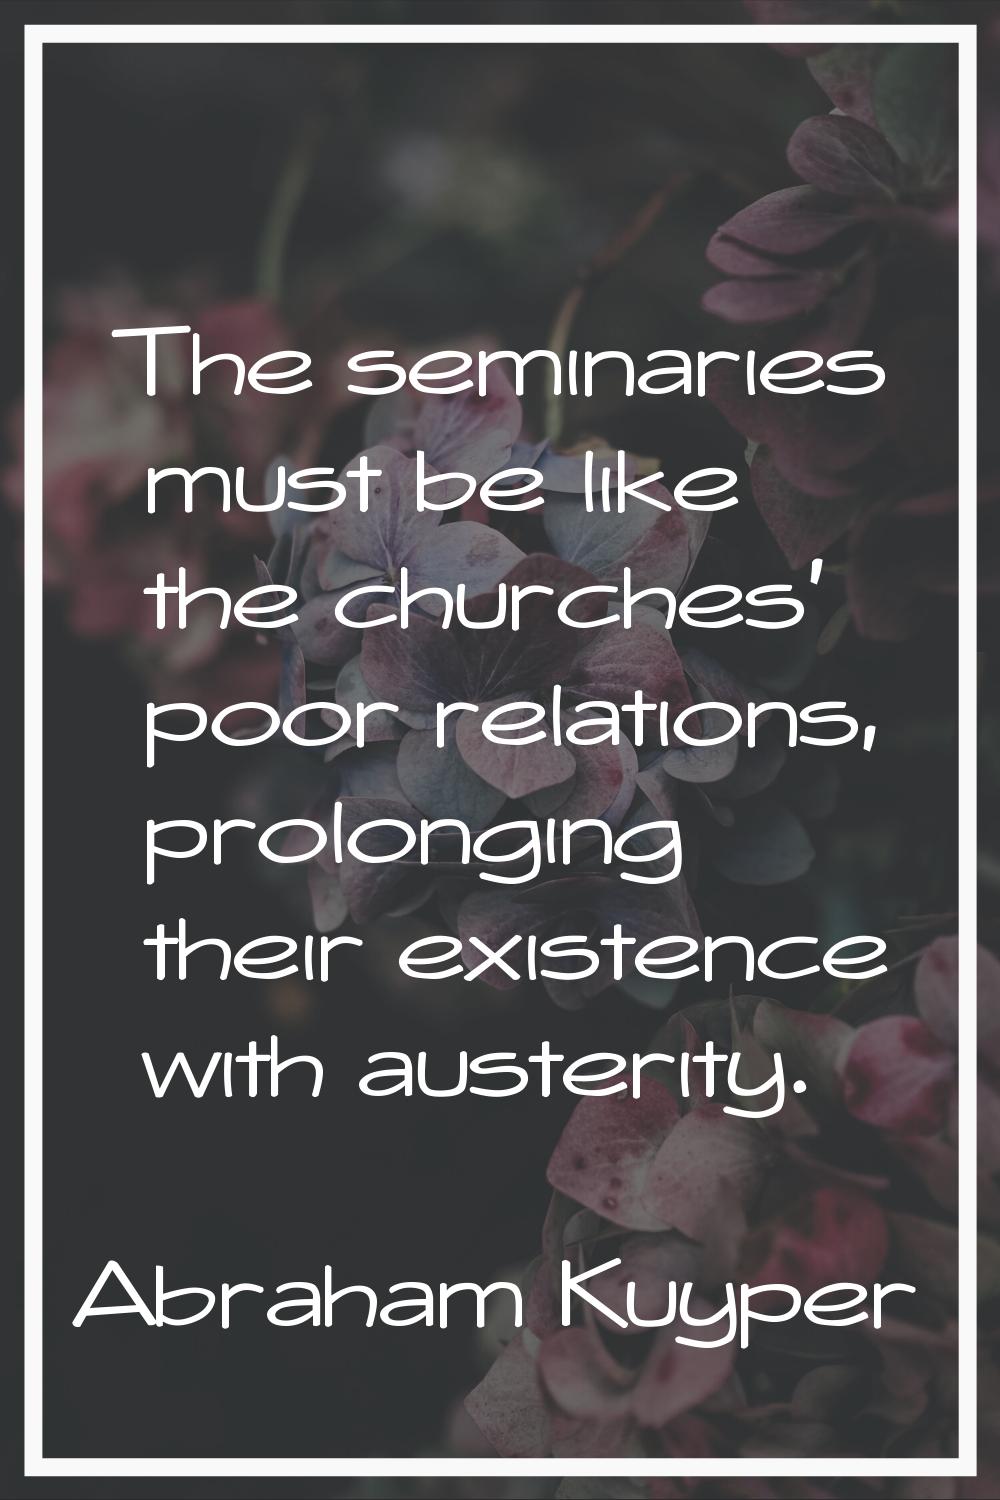 The seminaries must be like the churches' poor relations, prolonging their existence with austerity